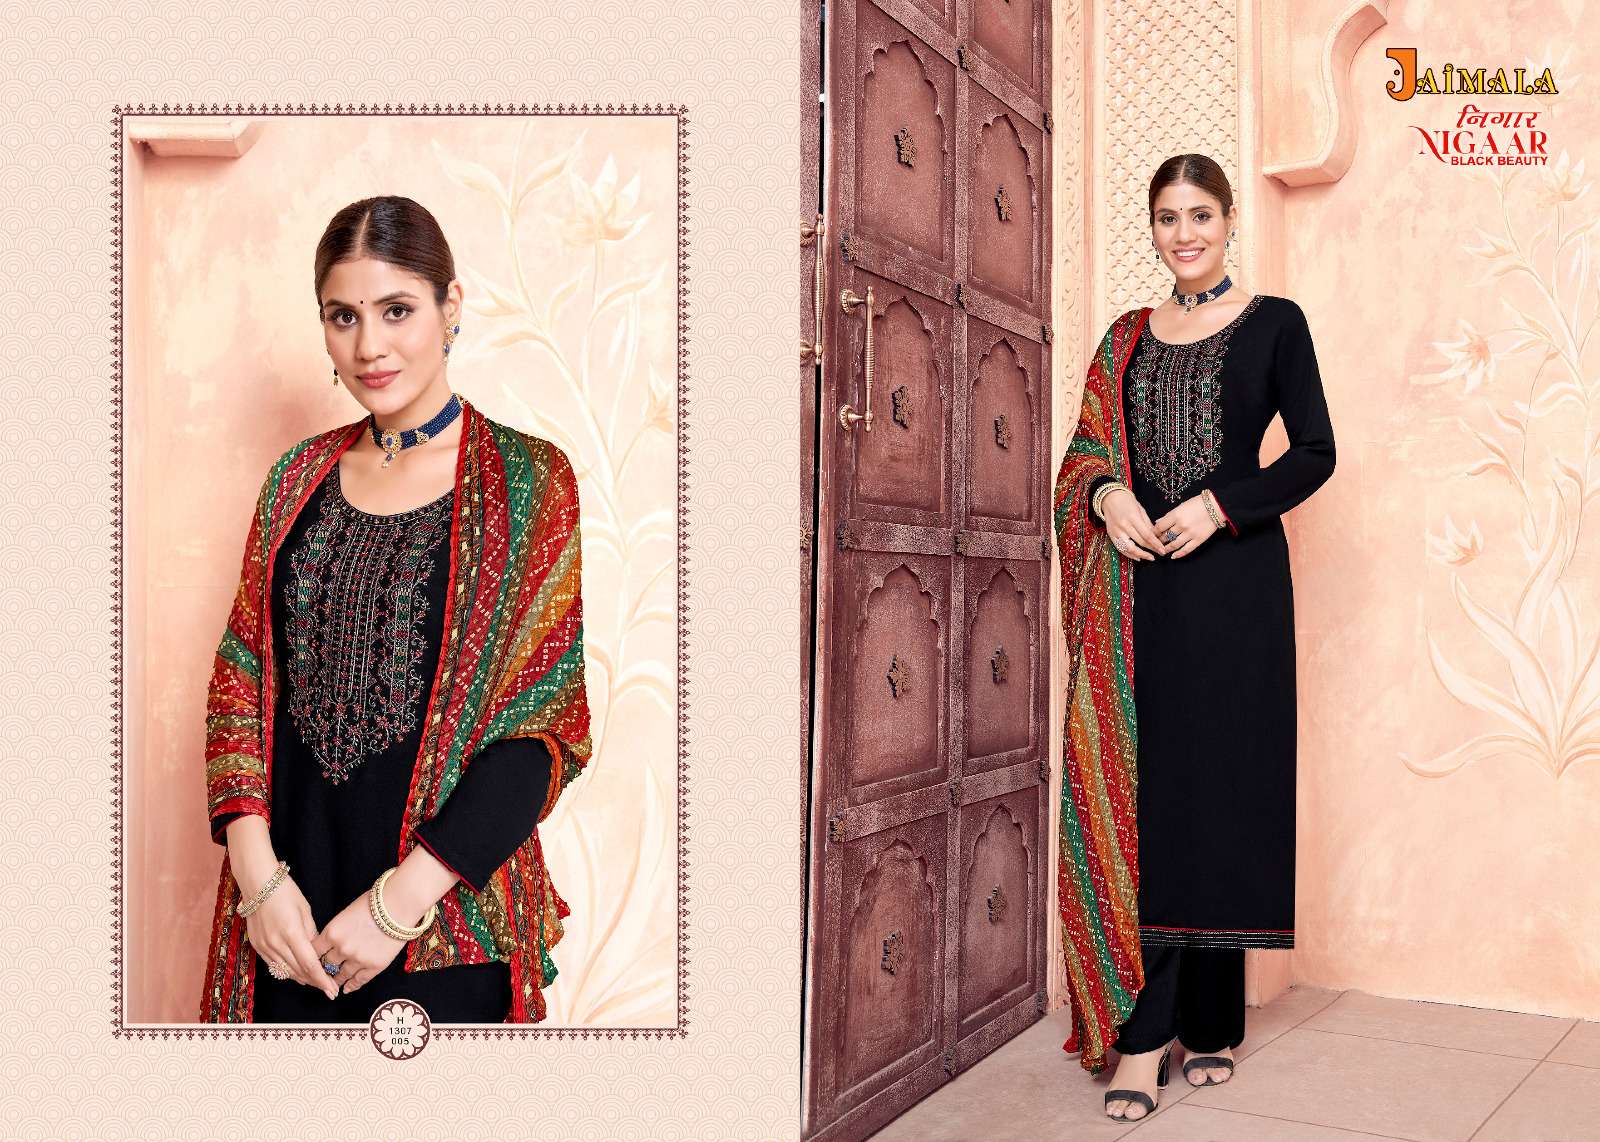 Nigaar Black Beauty By Jaimala 1307-001 To 1307-006 Series Designer Suits Collection Beautiful Stylish Colorful Fancy Party Wear & Occasional Wear Rayon Slub Dresses At Wholesale Price